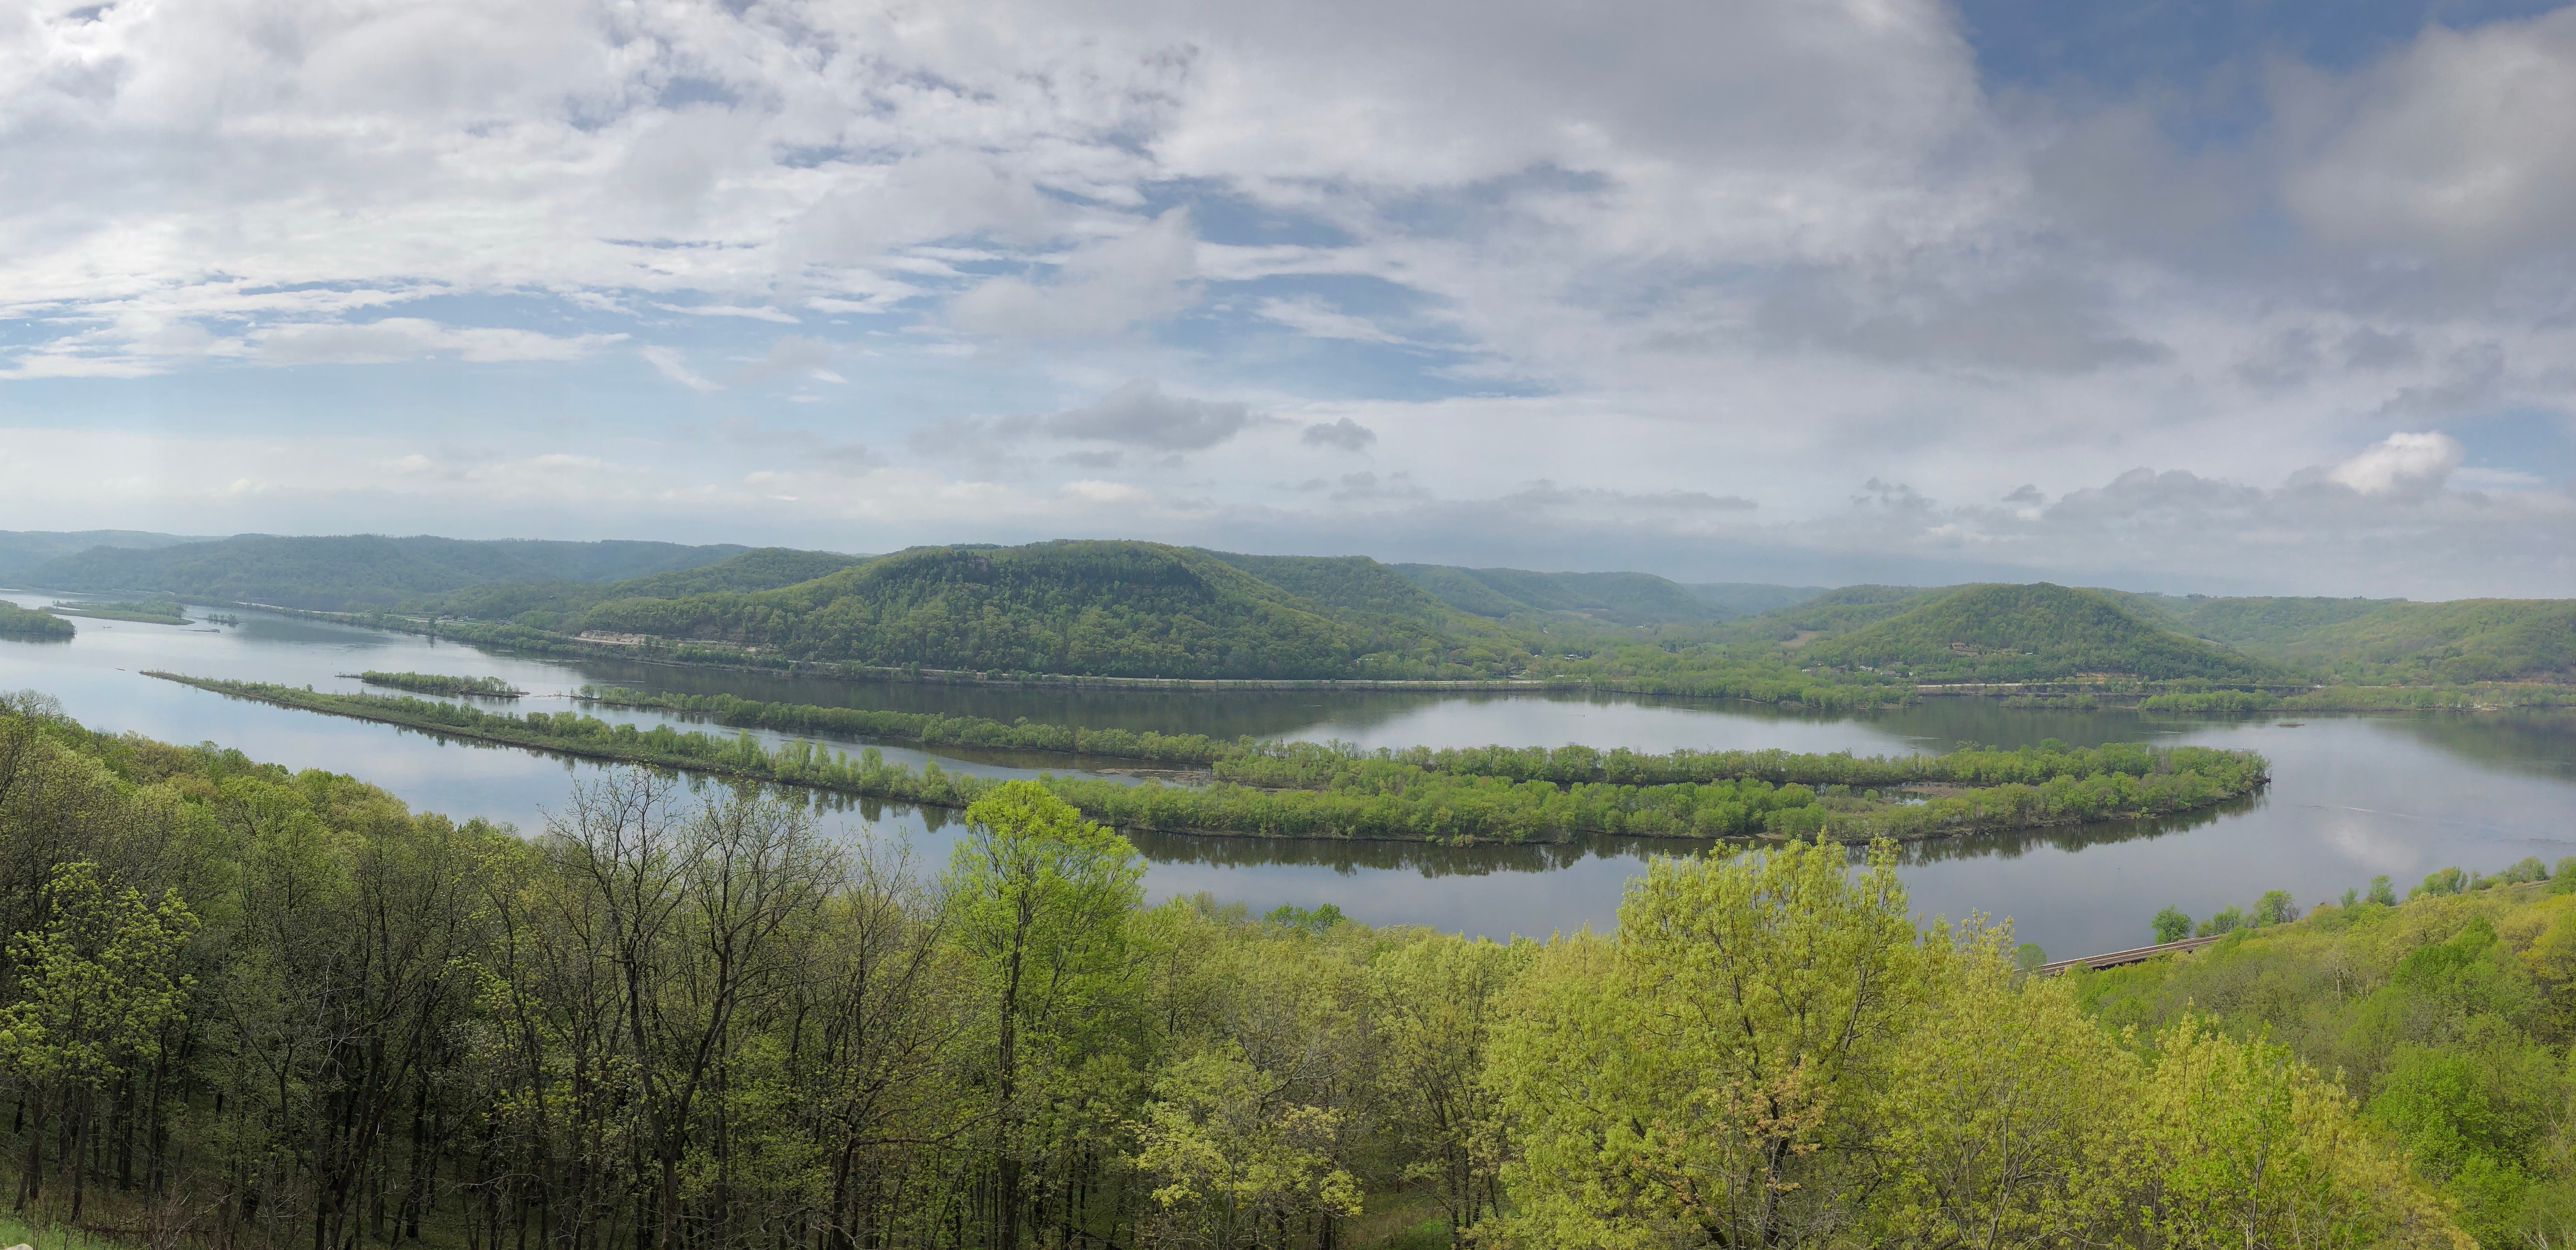 The view from the top of Brady's Bluff